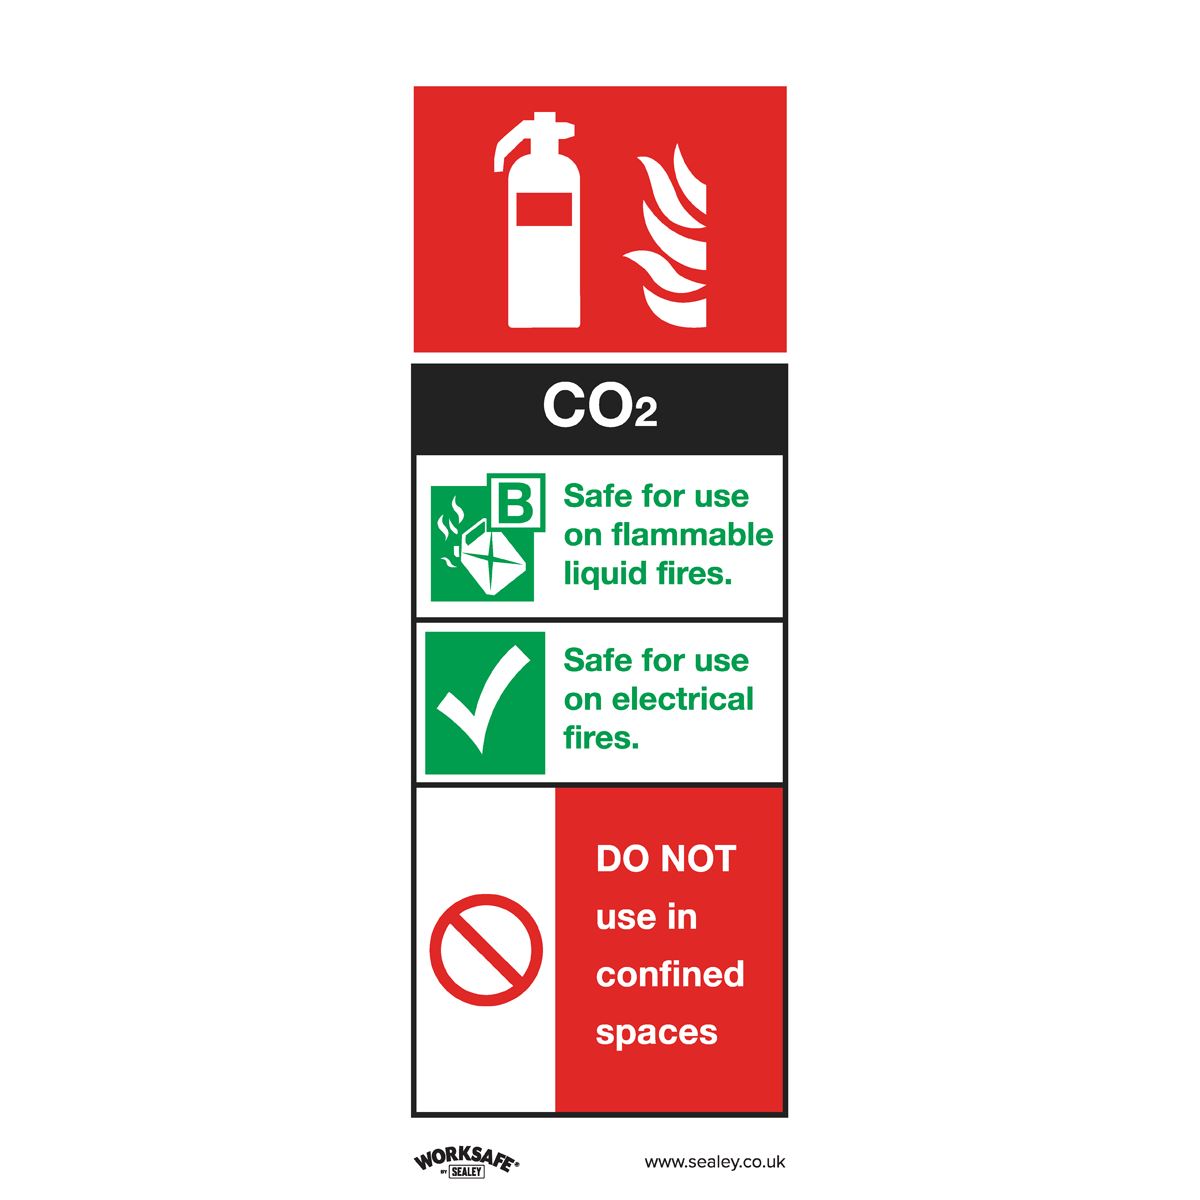 Worksafe by Sealey Safe Conditions Safety Sign - CO2 Fire Extinguisher - Self-Adhesive Vinyl